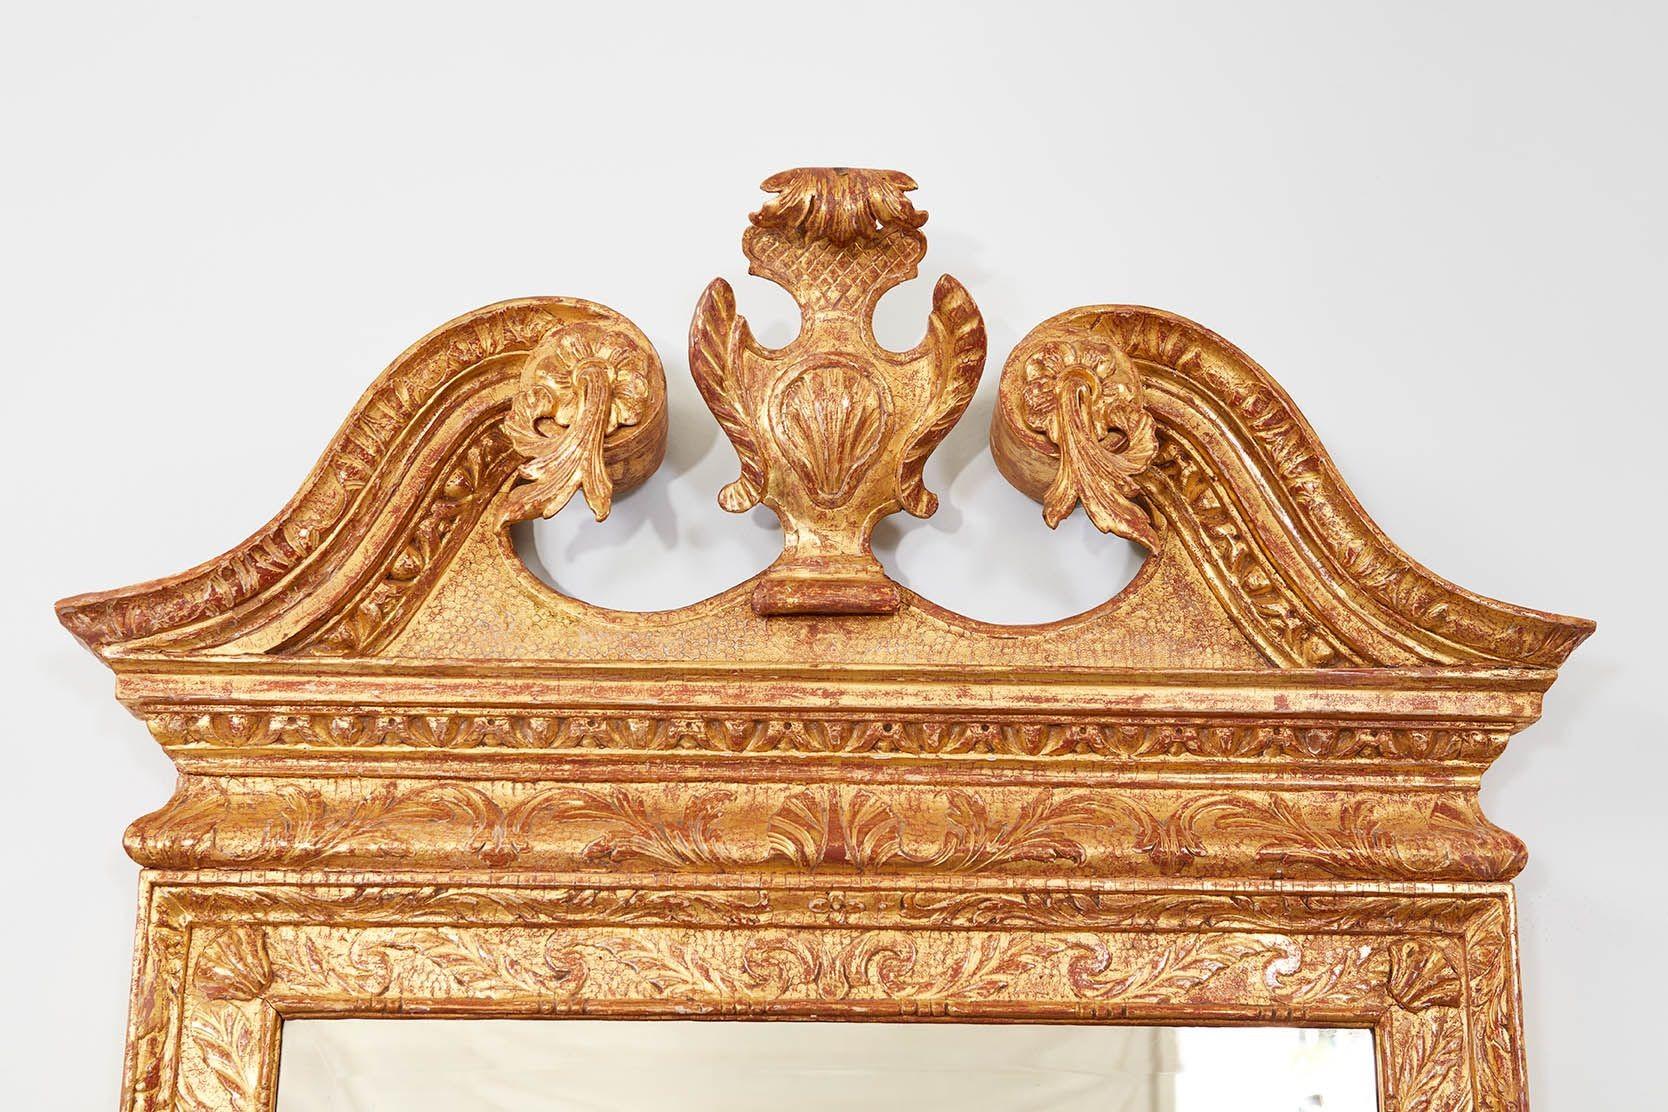 Very fine George II period giltwood mirror, the swan neck pediment with foliate carved scrolls surrounding central shell carved cartouche, the whole with egg and dart molding, the base with shell carving surrounded by scrolls, the background with